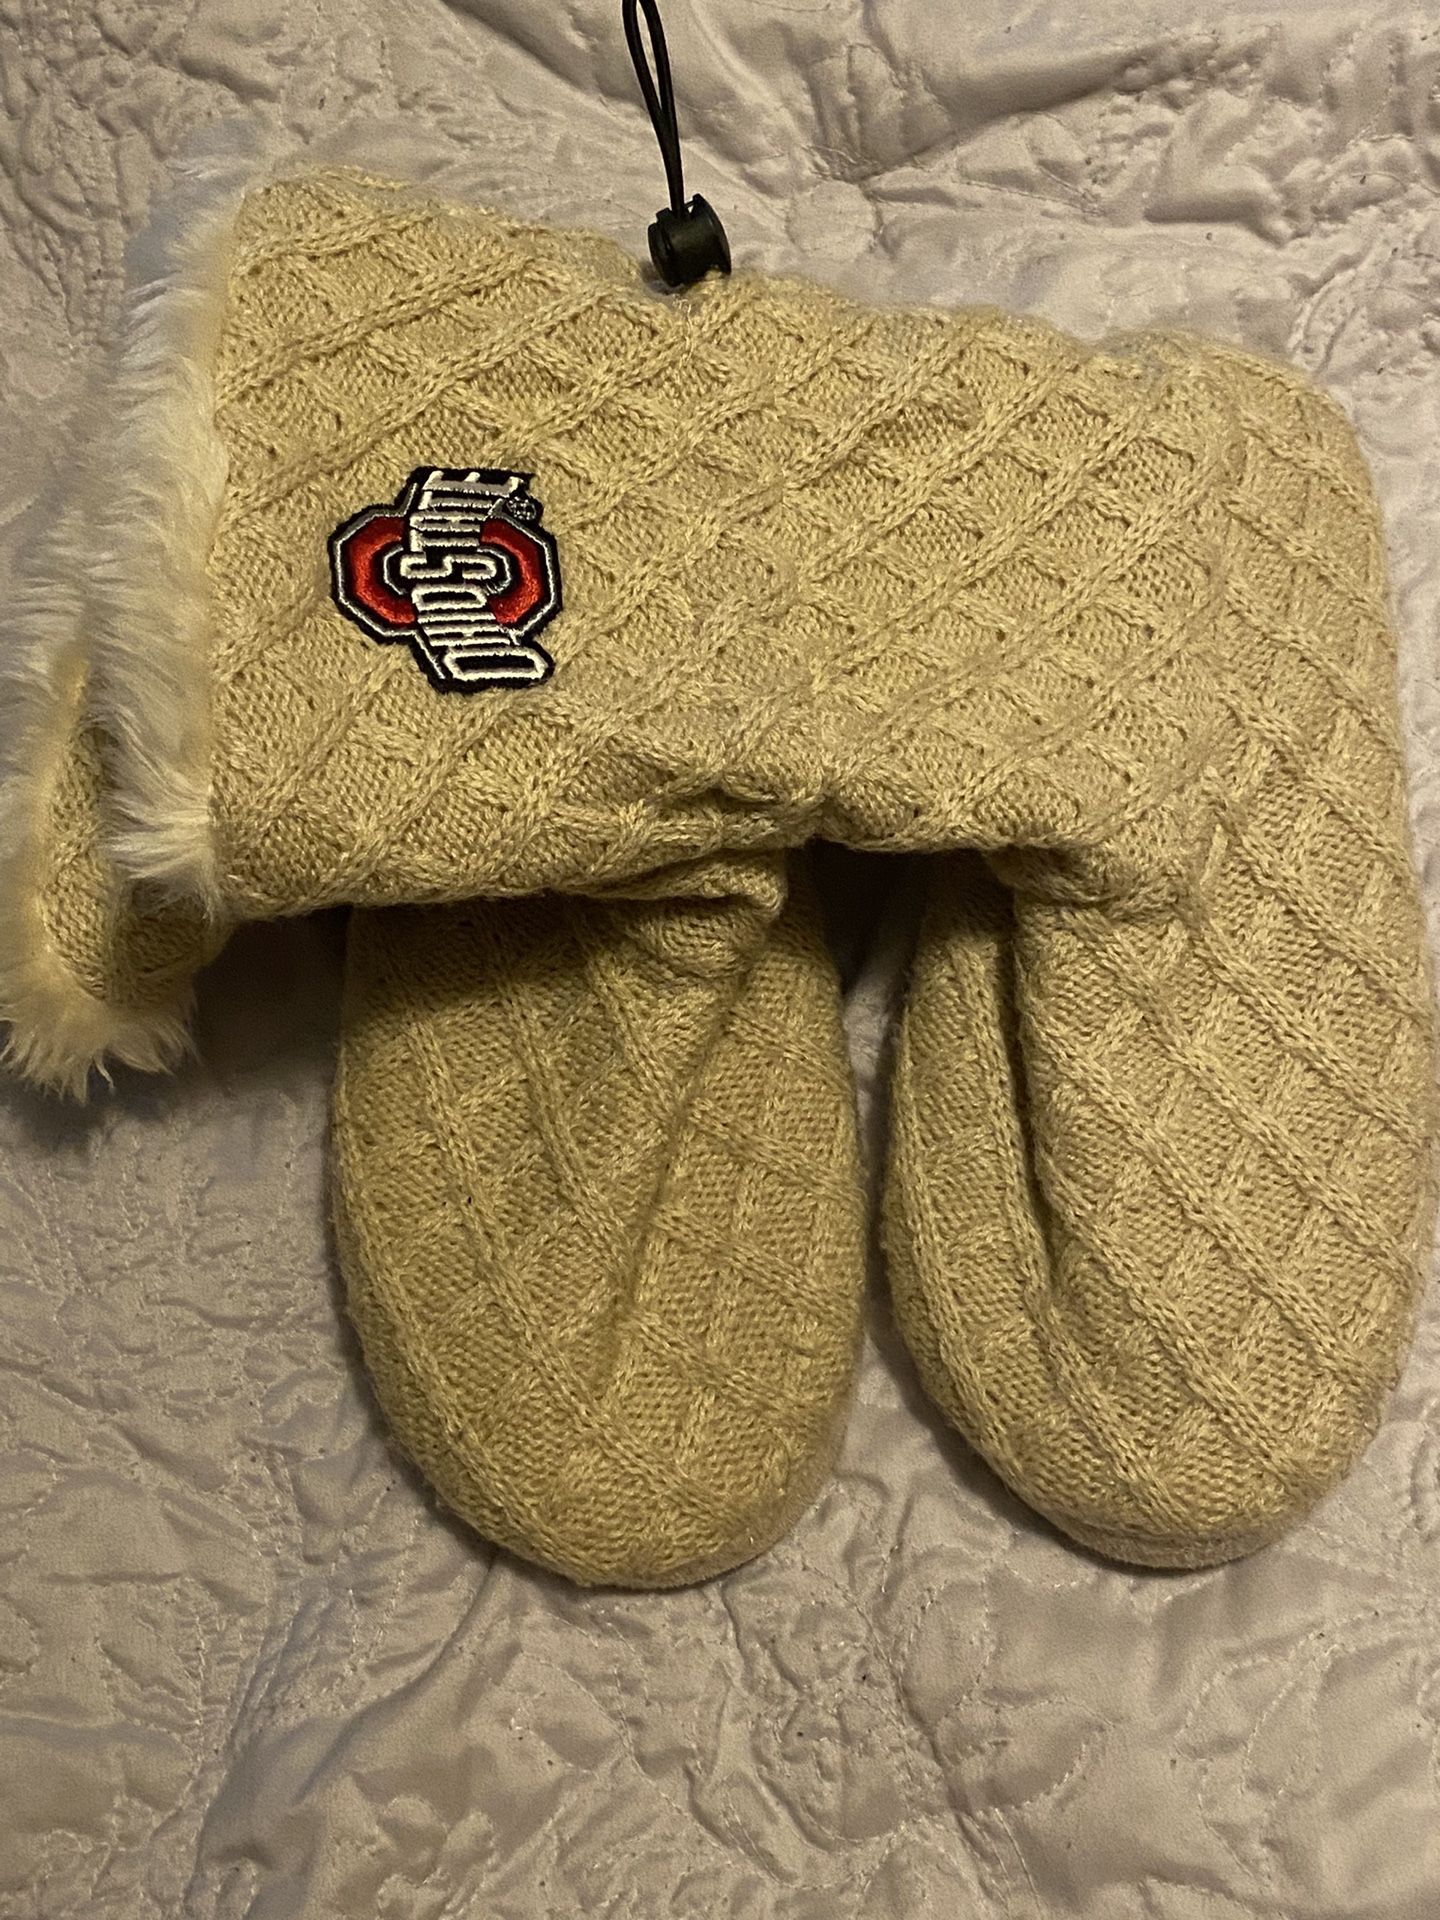 Ohio State Winter Boots 